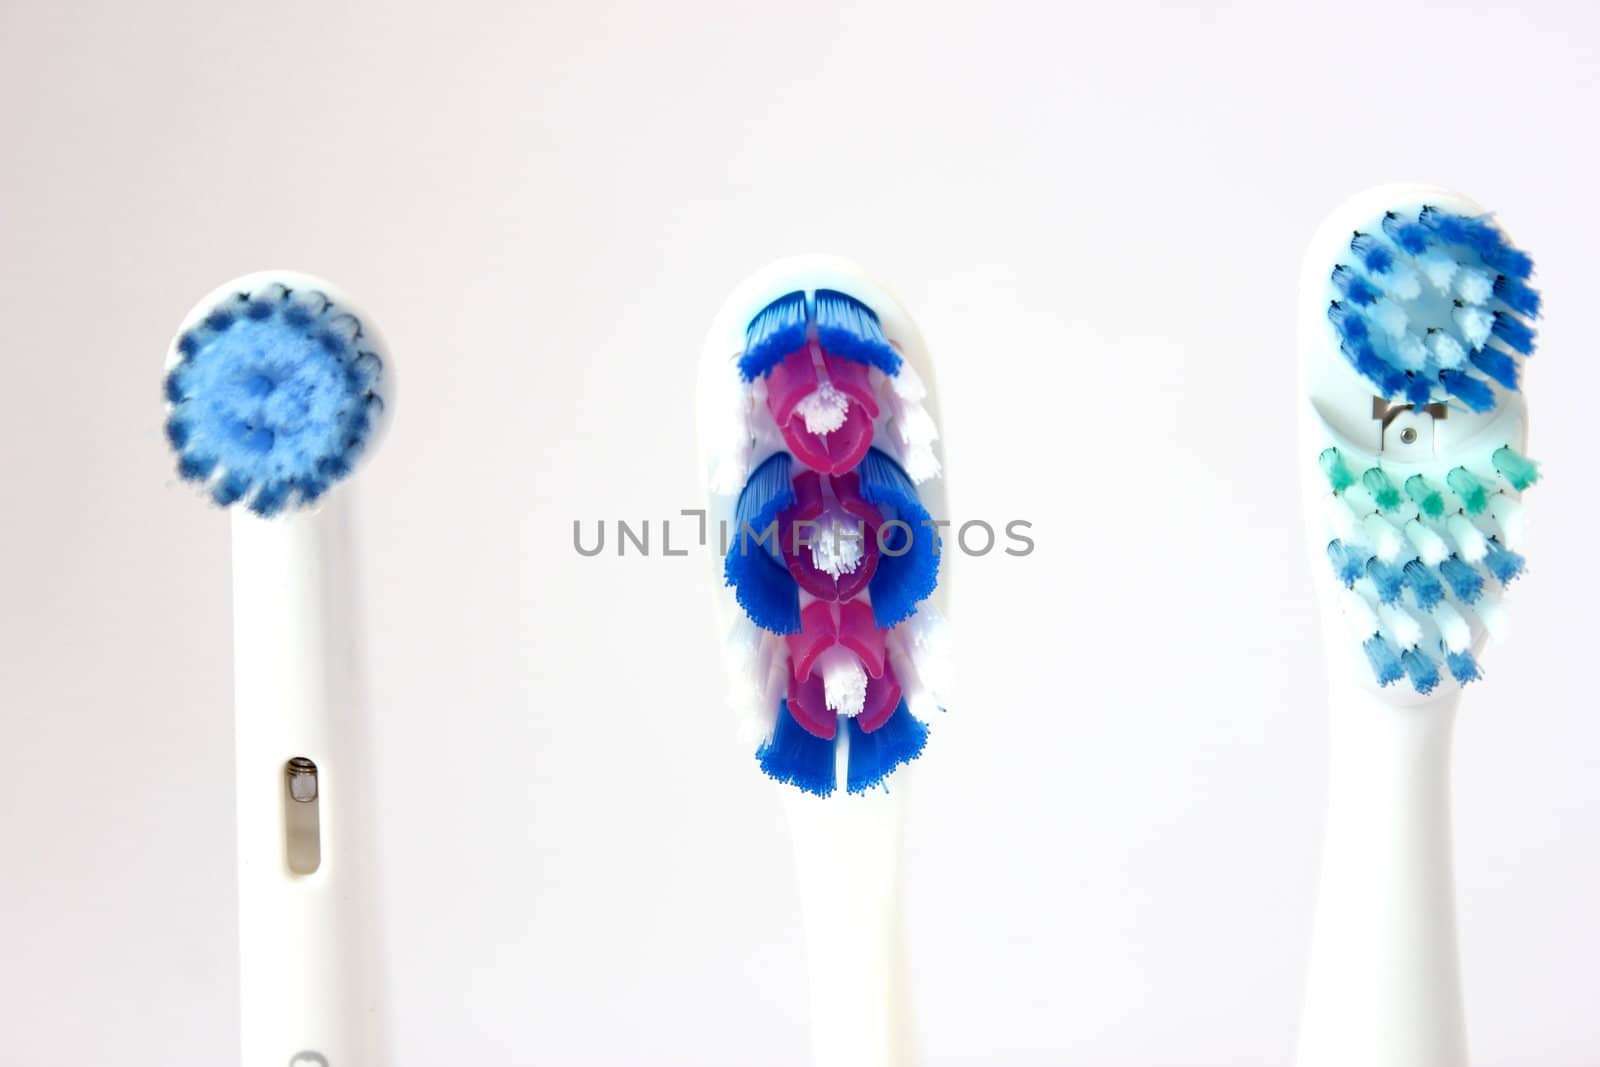 3 different types of tooth brush heads on an isolated background.